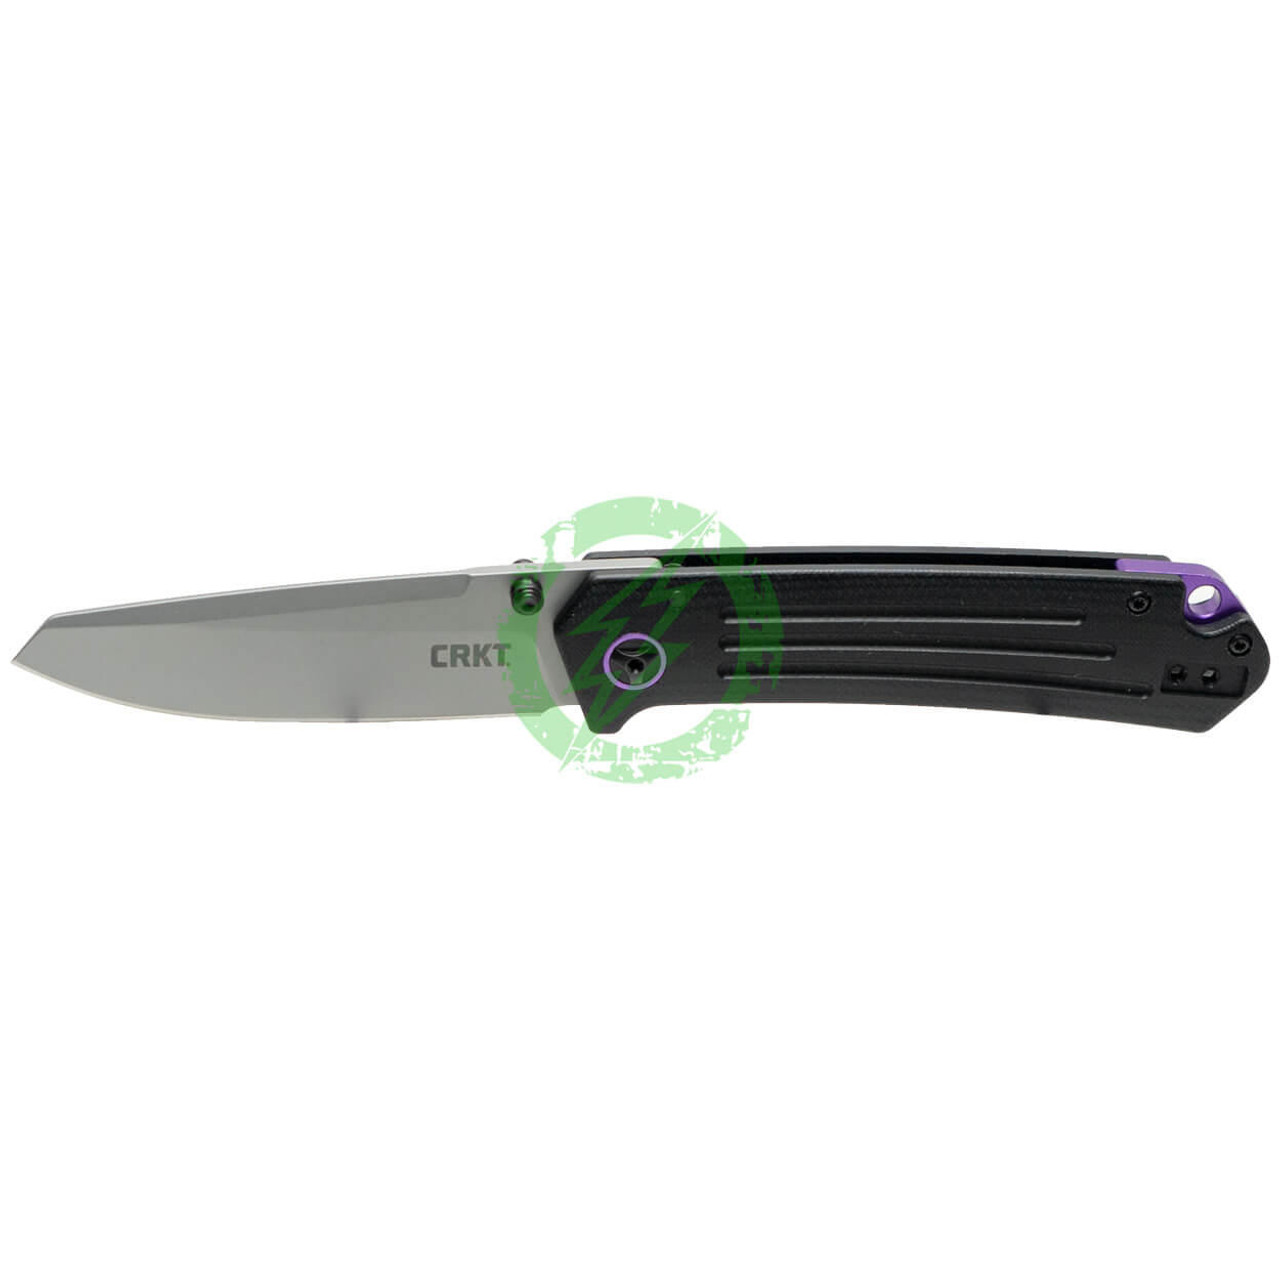 CRKT (Columbia River Knife Tool) CRKT Montosa Folding Blade Knife with Bead Blast Finish & G10 Handle 